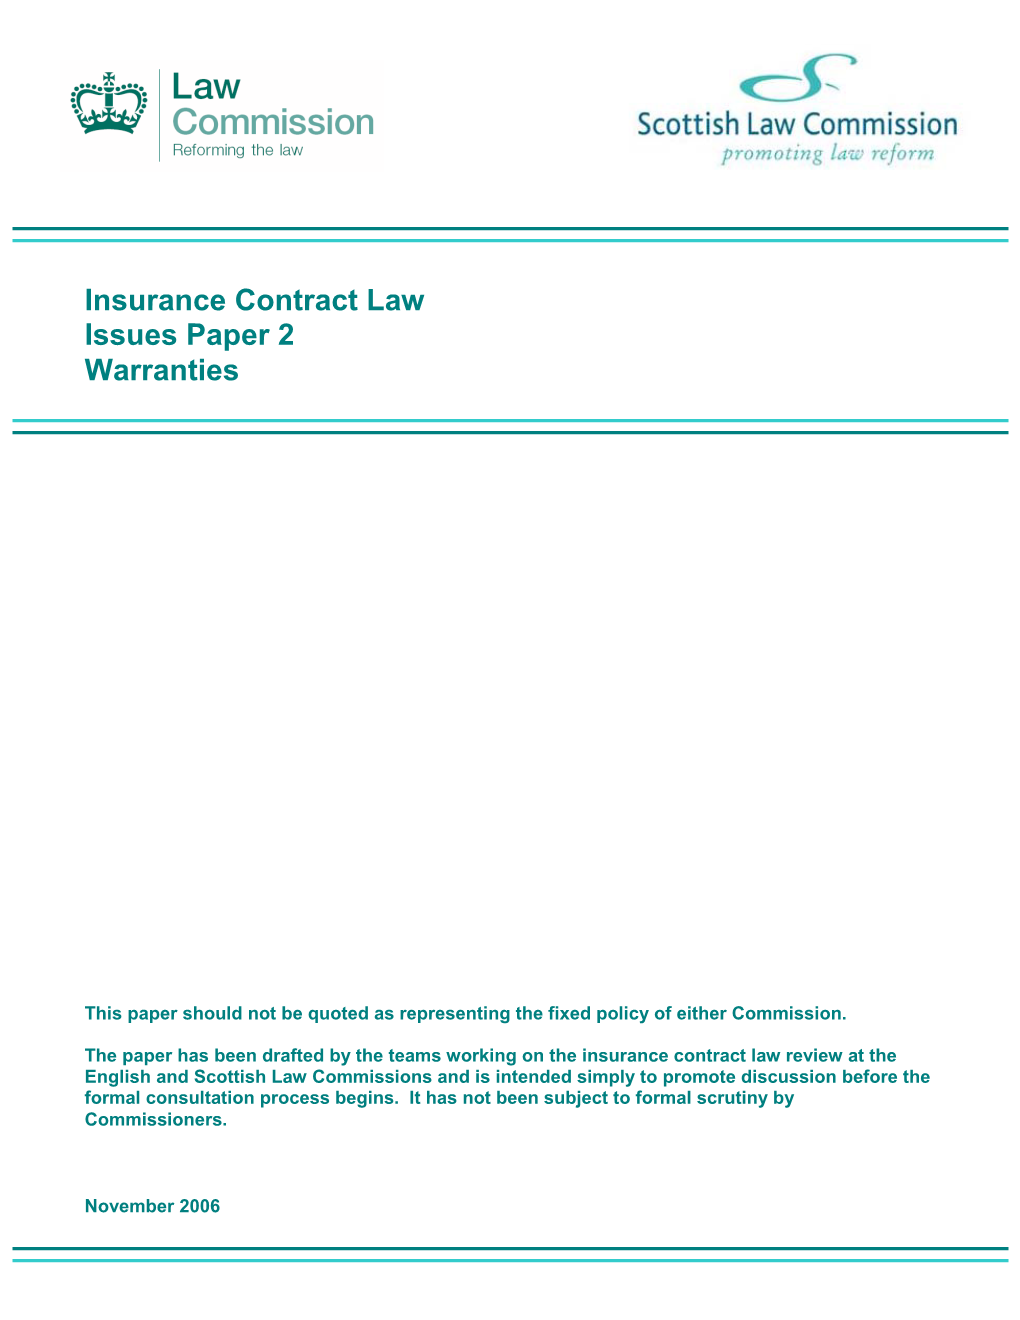 Insurance Contract Law Issues Paper 2 Warranties